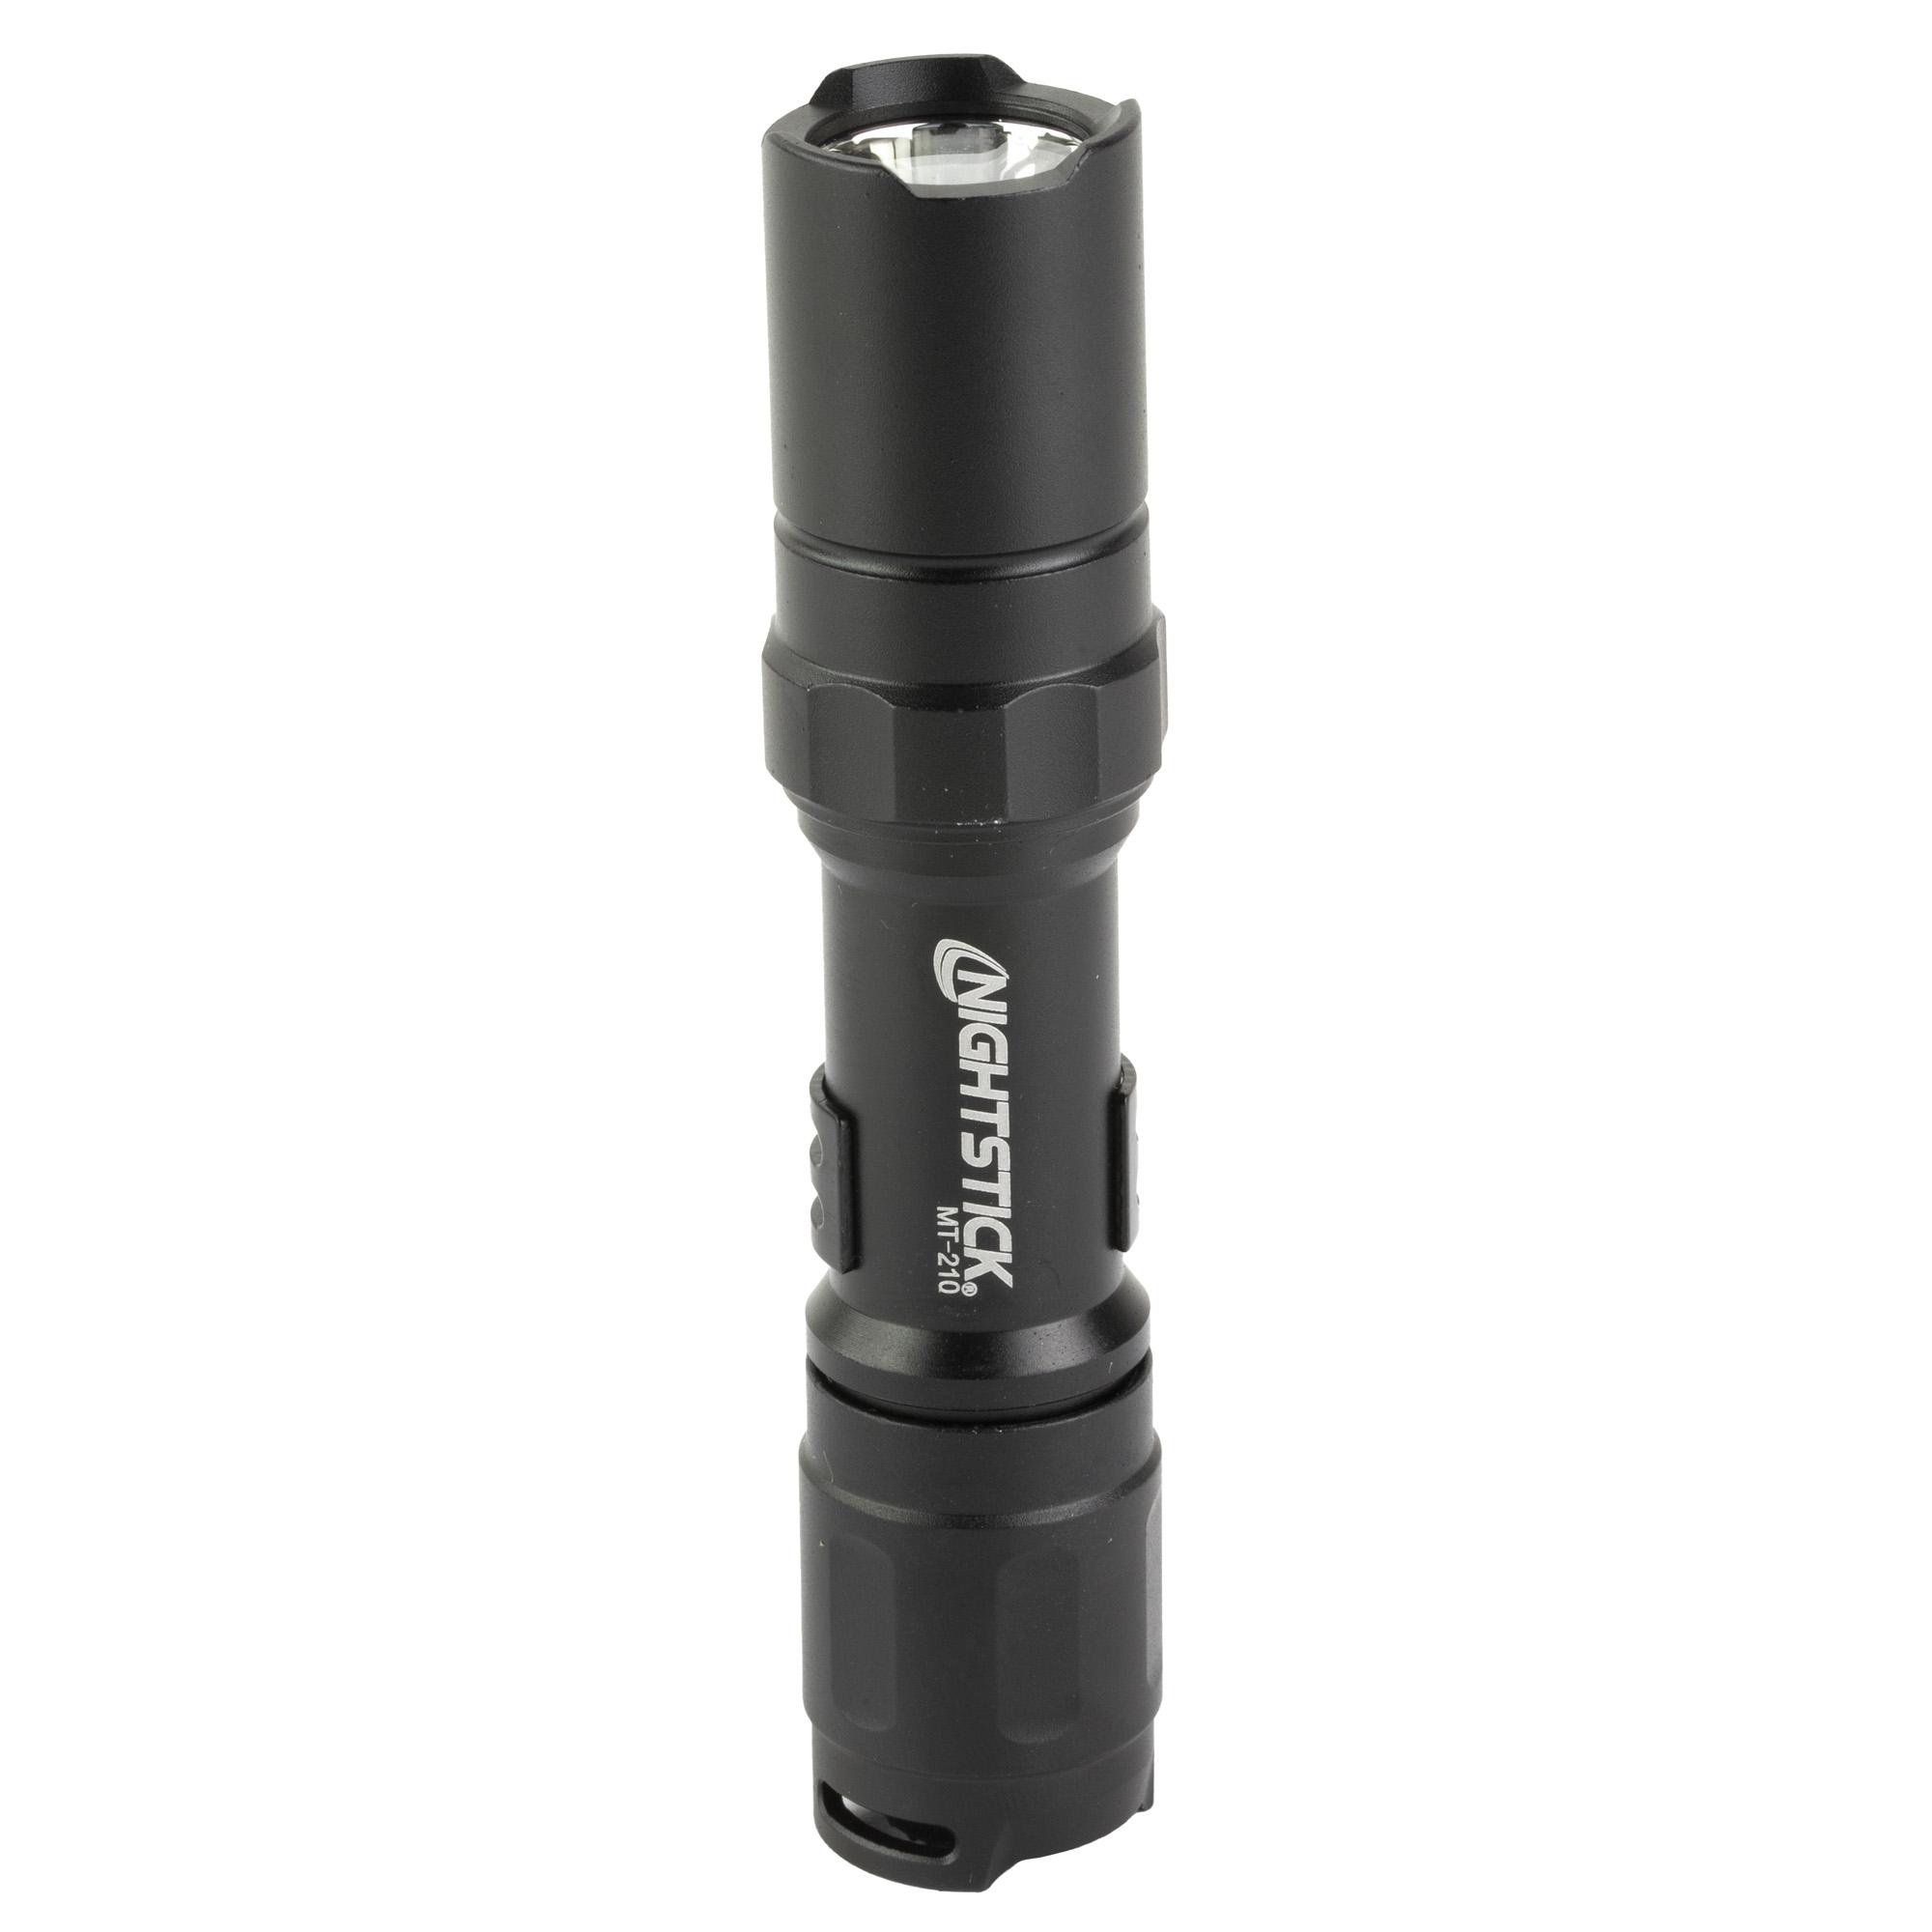 Nightstick Mini Tactical Light 120 Lm - 4Shooters